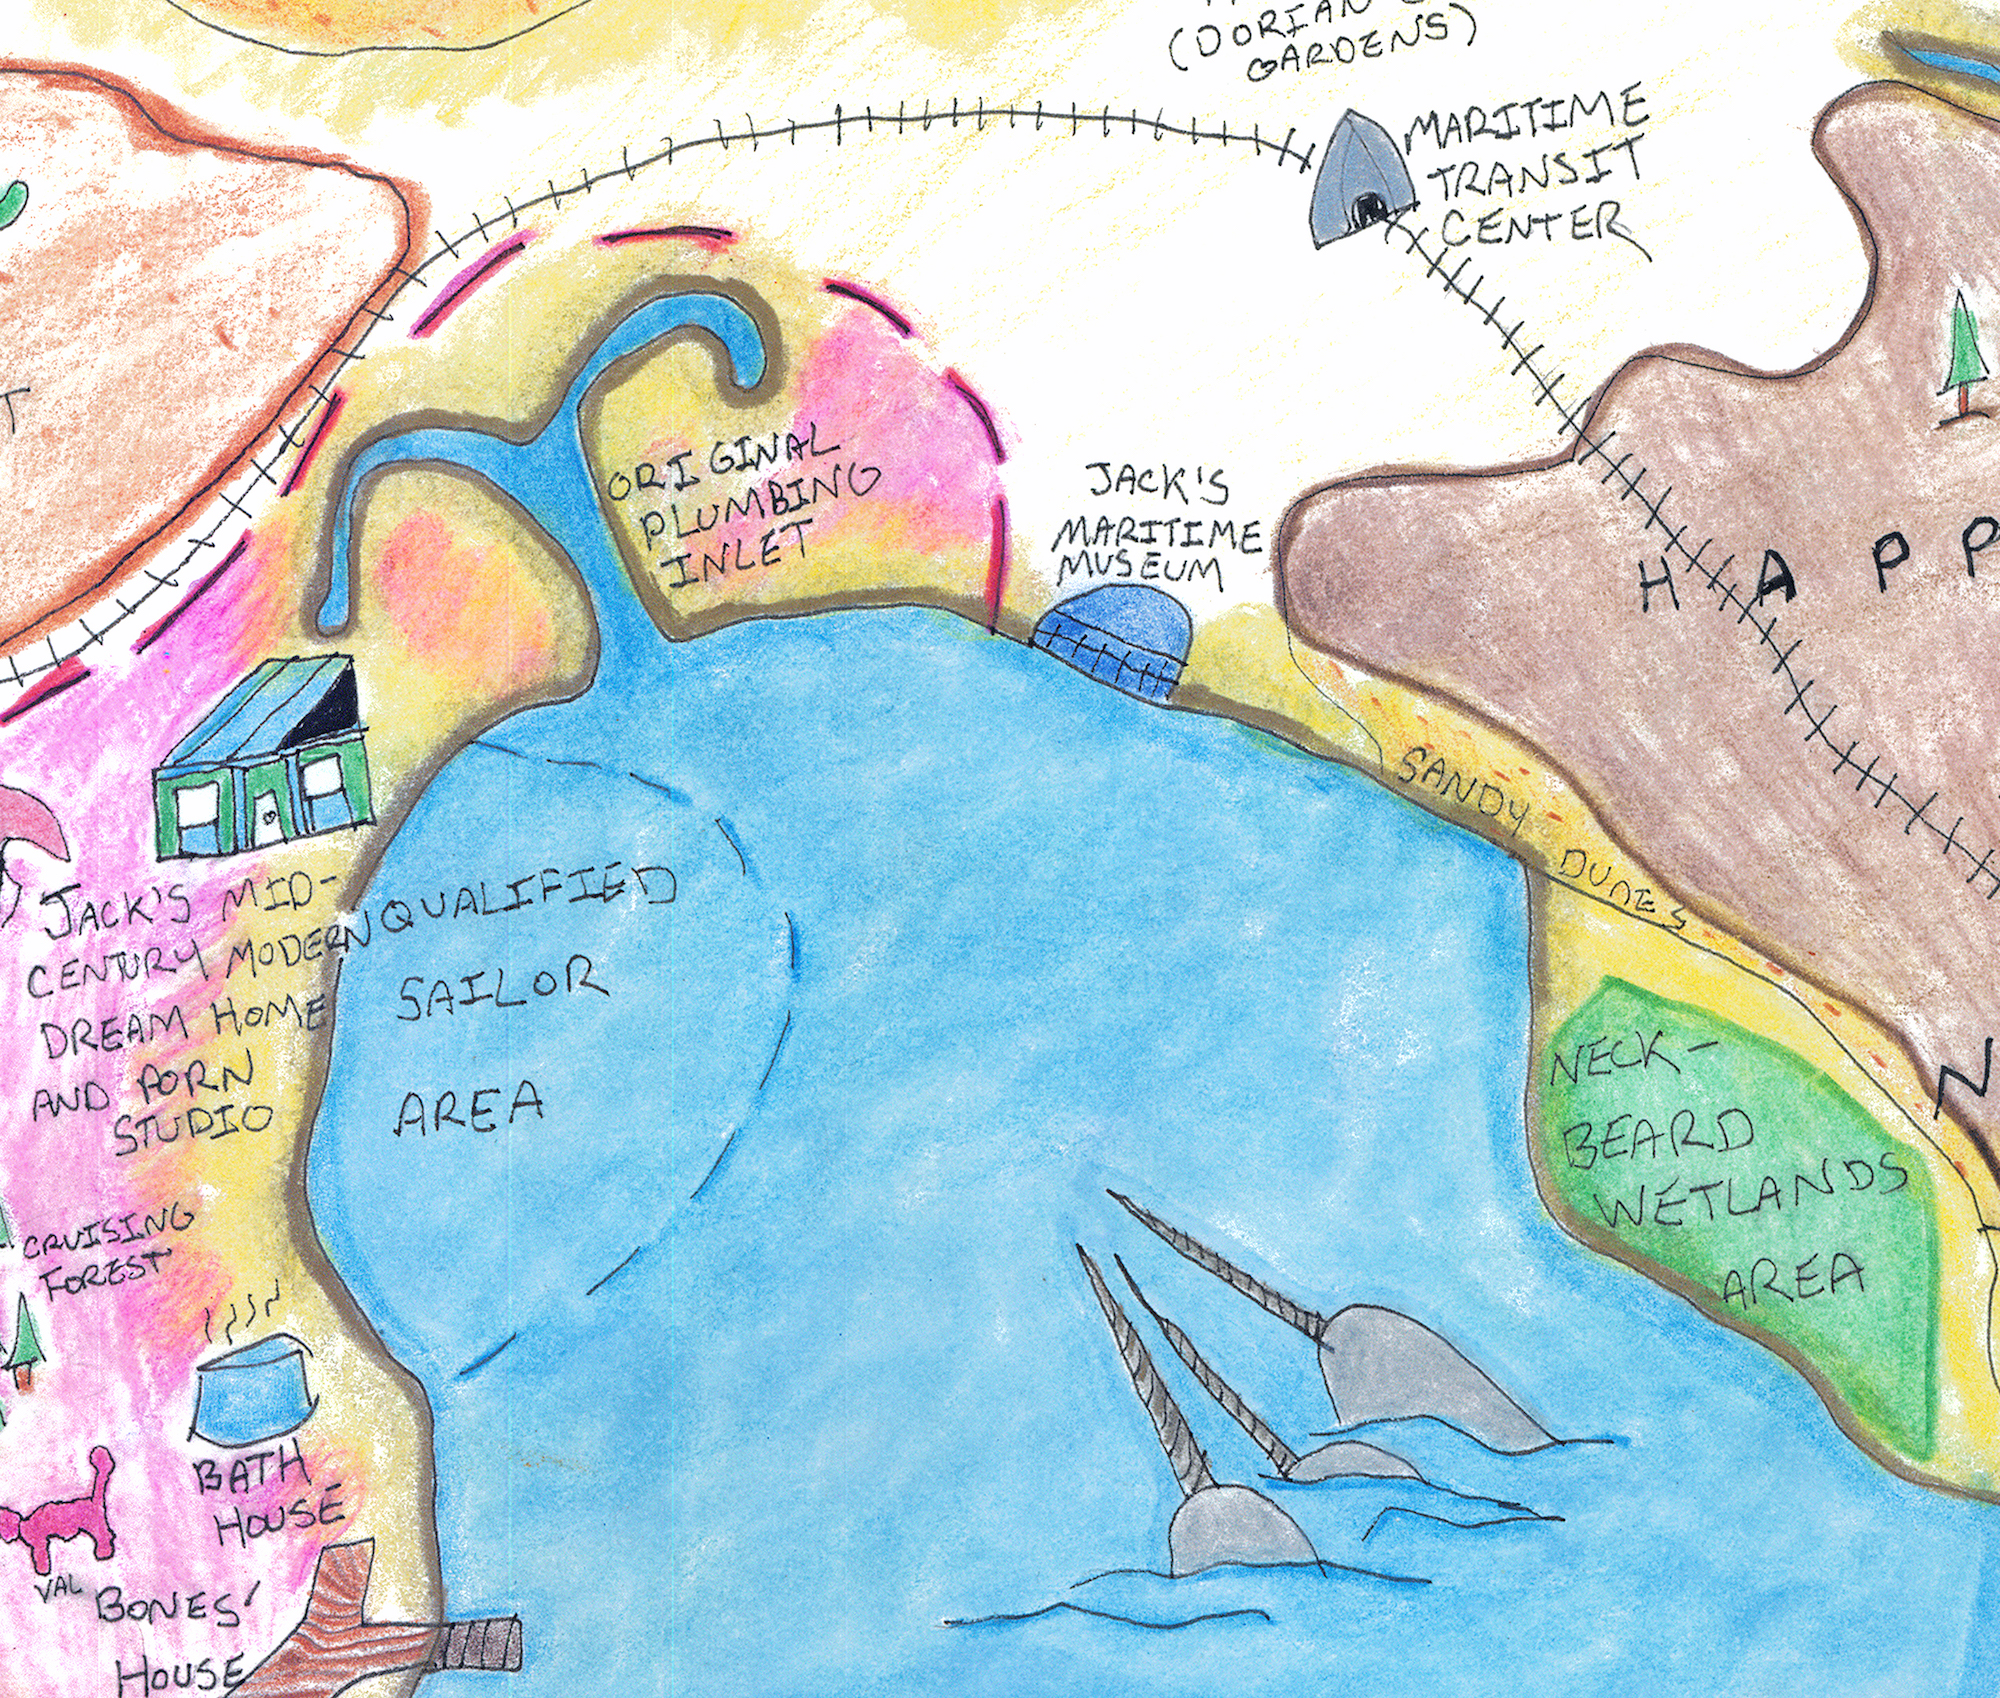 a detail of the hand-drawn map of Samsies Island; this shot details landmarks such as 'Neck-Beard Wetlands Area' and 'Jack's Mid-Century Modern Dream Home and Porn Studio'